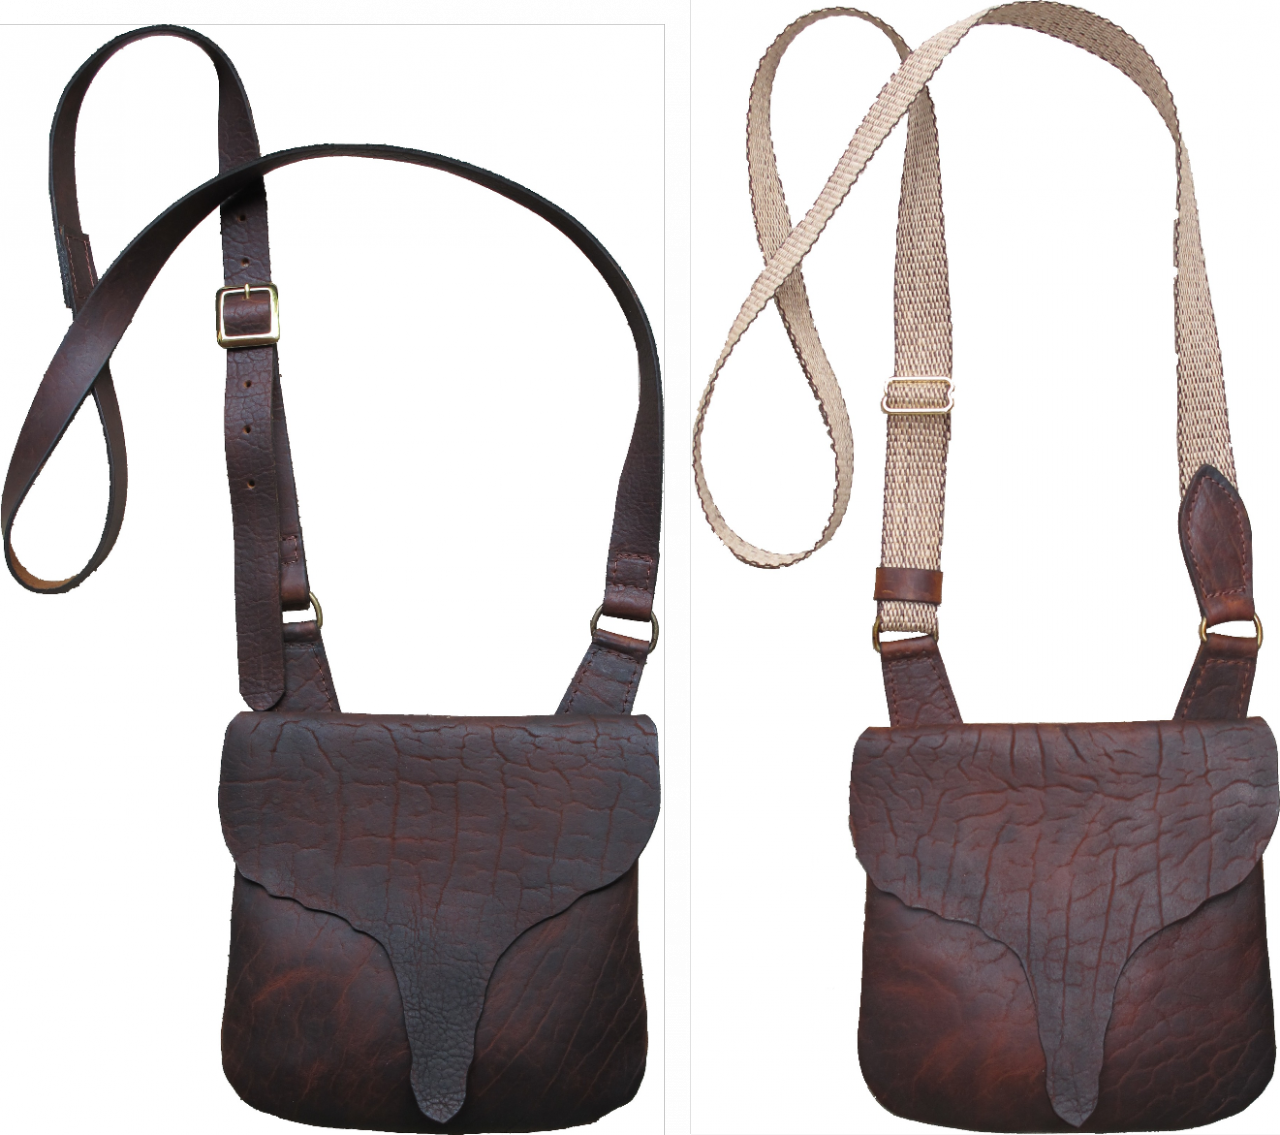 Traditional leather possibles bag